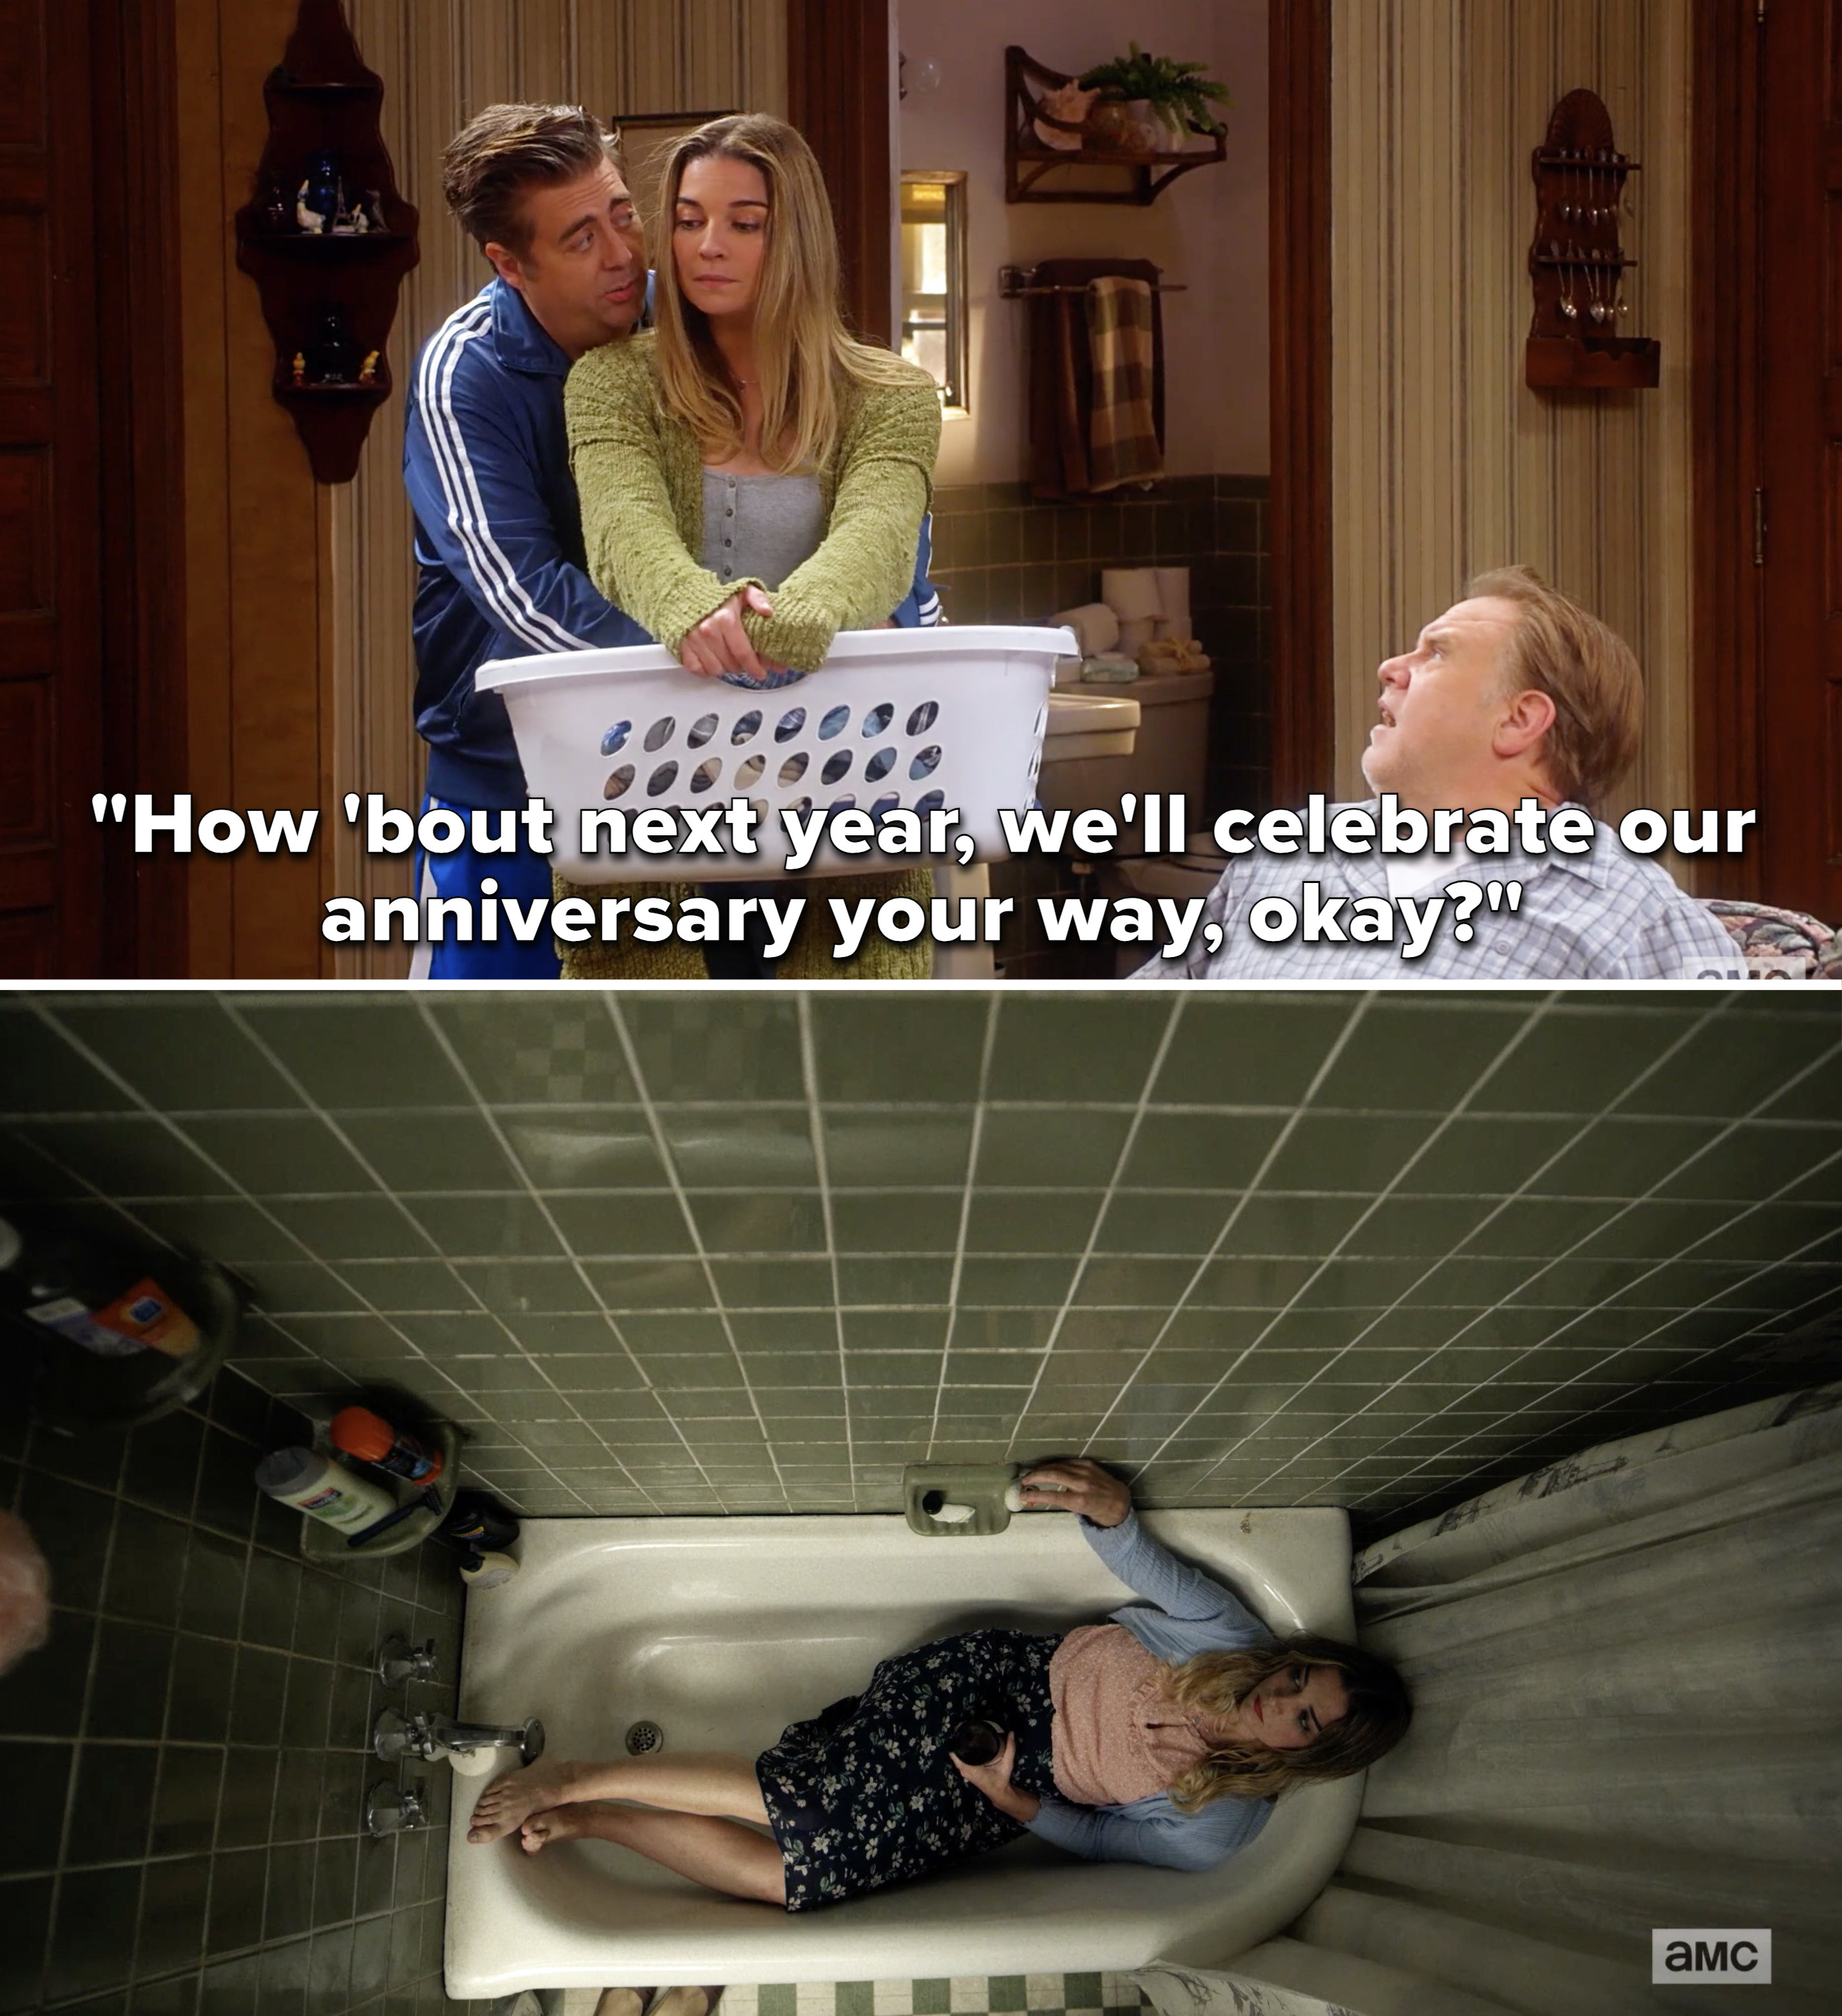 Kevin telling Allison, "How 'bout next year, we'll celebrate our anniversary your way, okay?" and a still of Allison sitting fully clothed in the bathtub